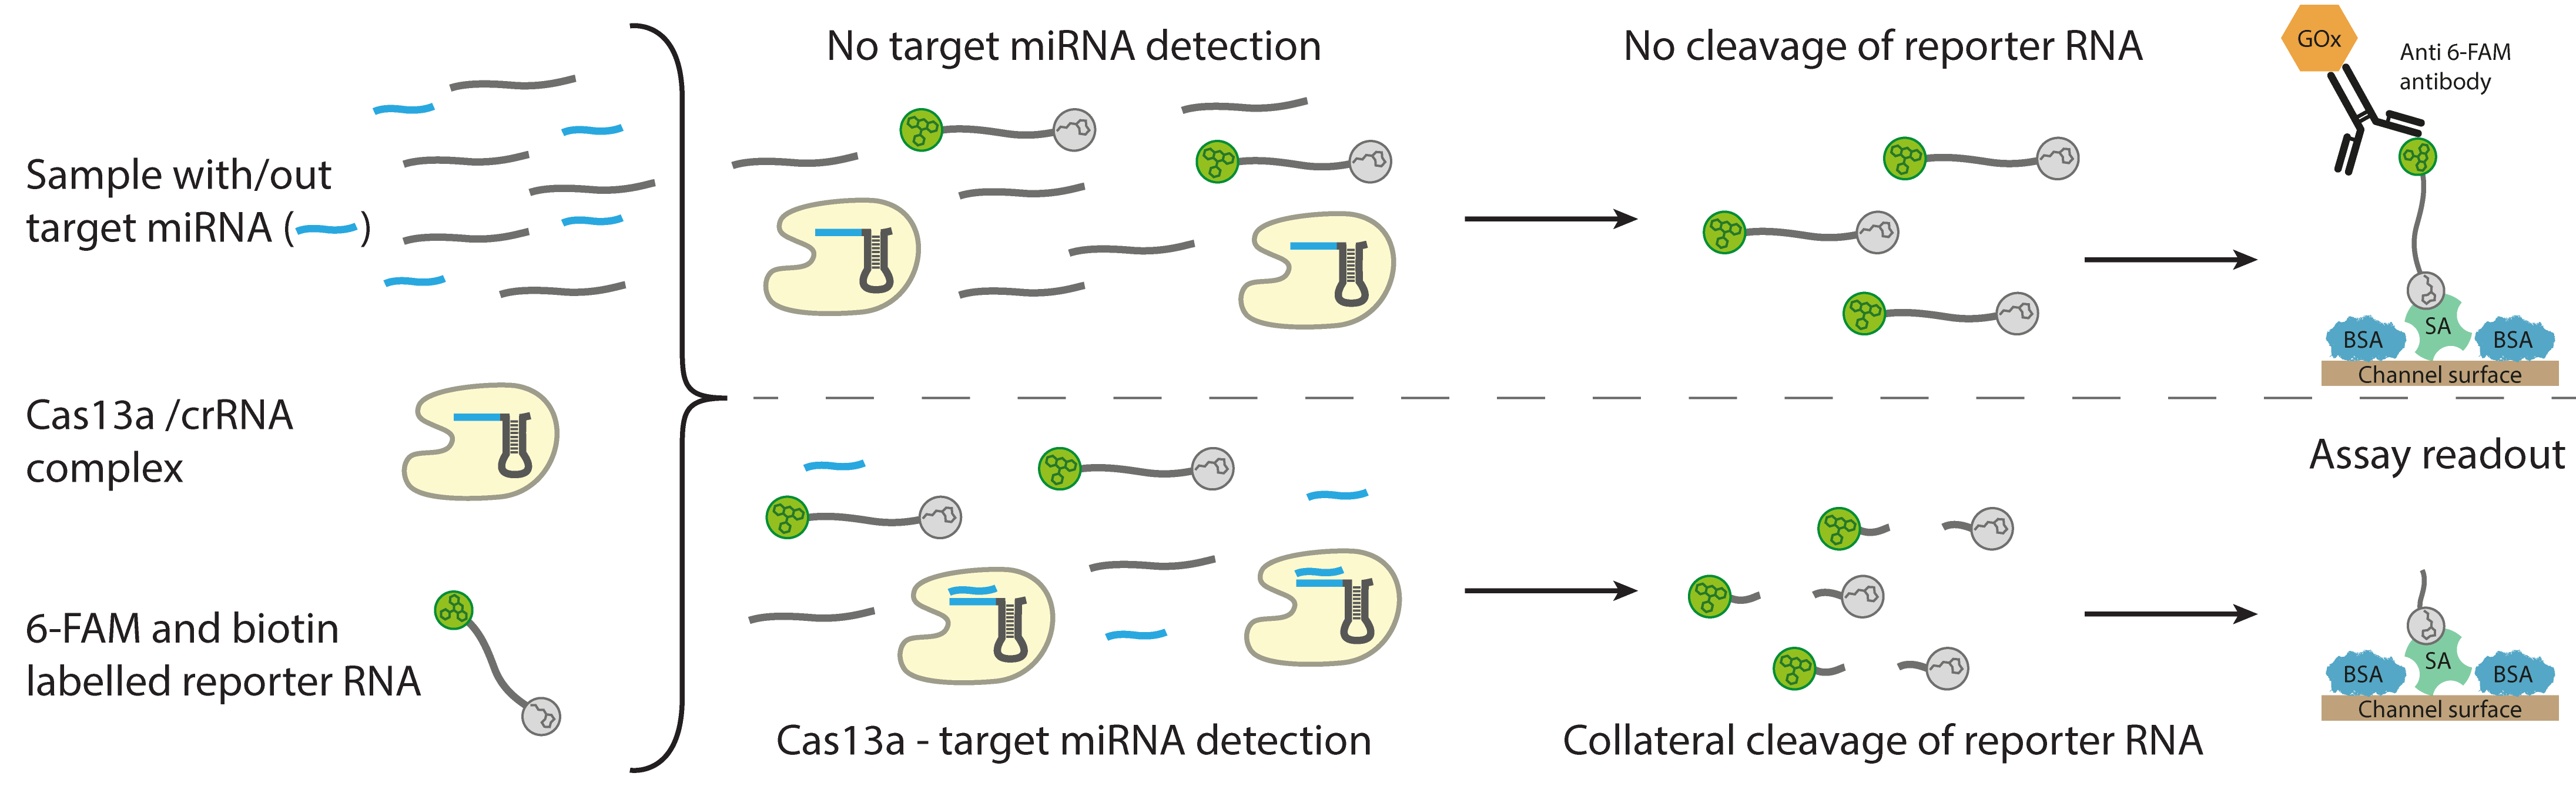 SSchematic representation of the test method: RNA, enzyme, labels and antibodies